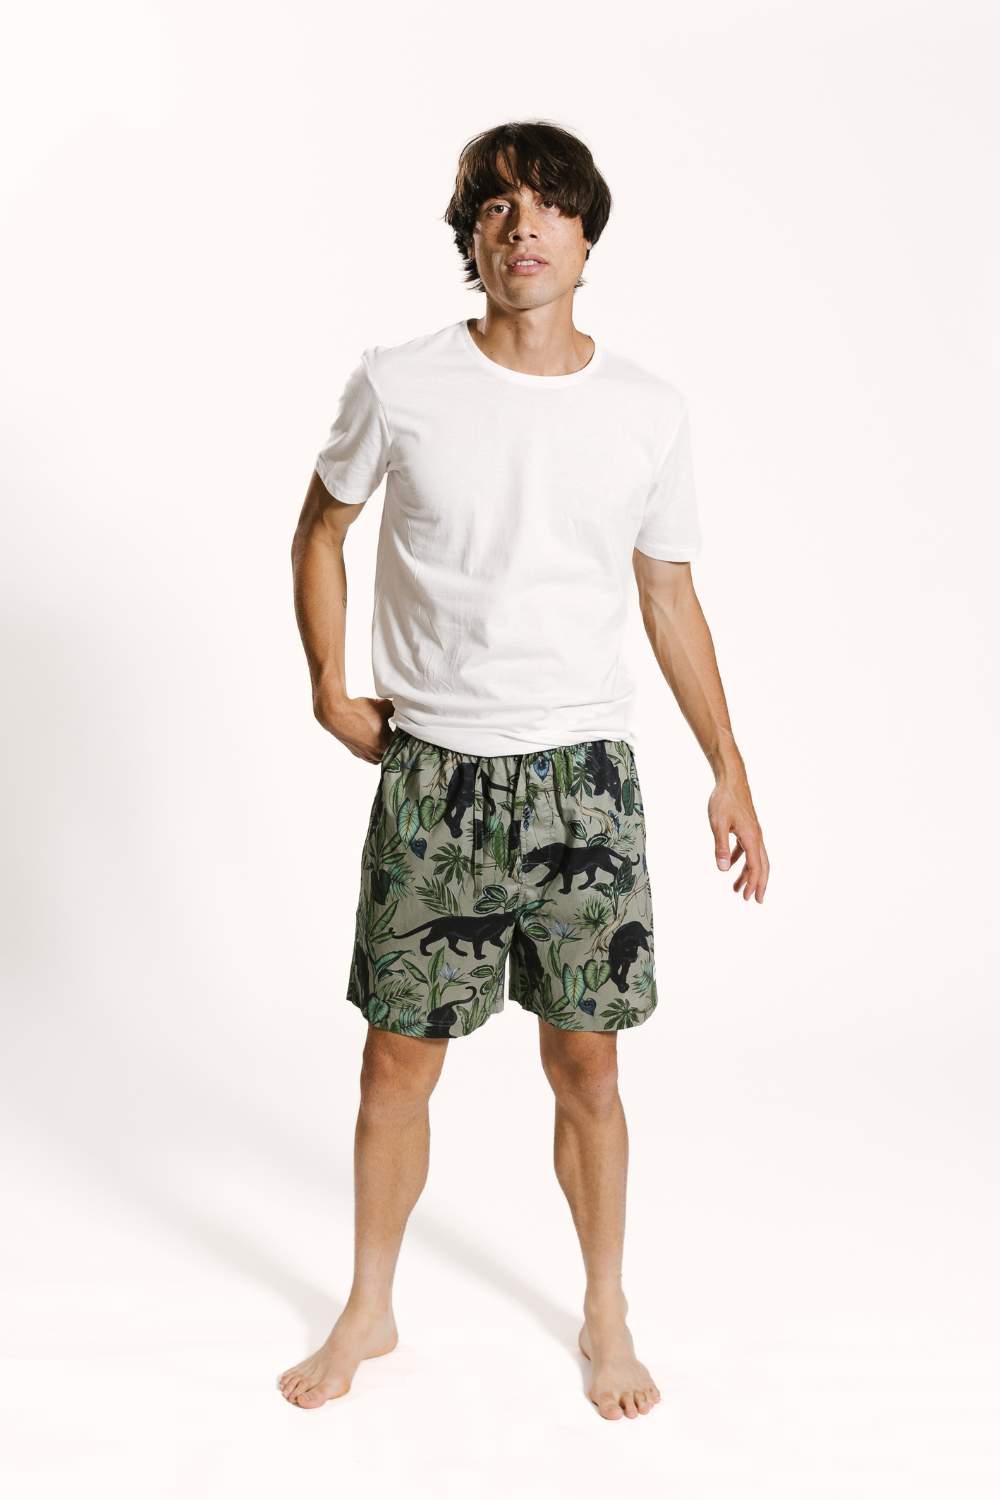 White organic cotton pyjama t-shirt paired with a tropical jungle panther printed pyjama shorts